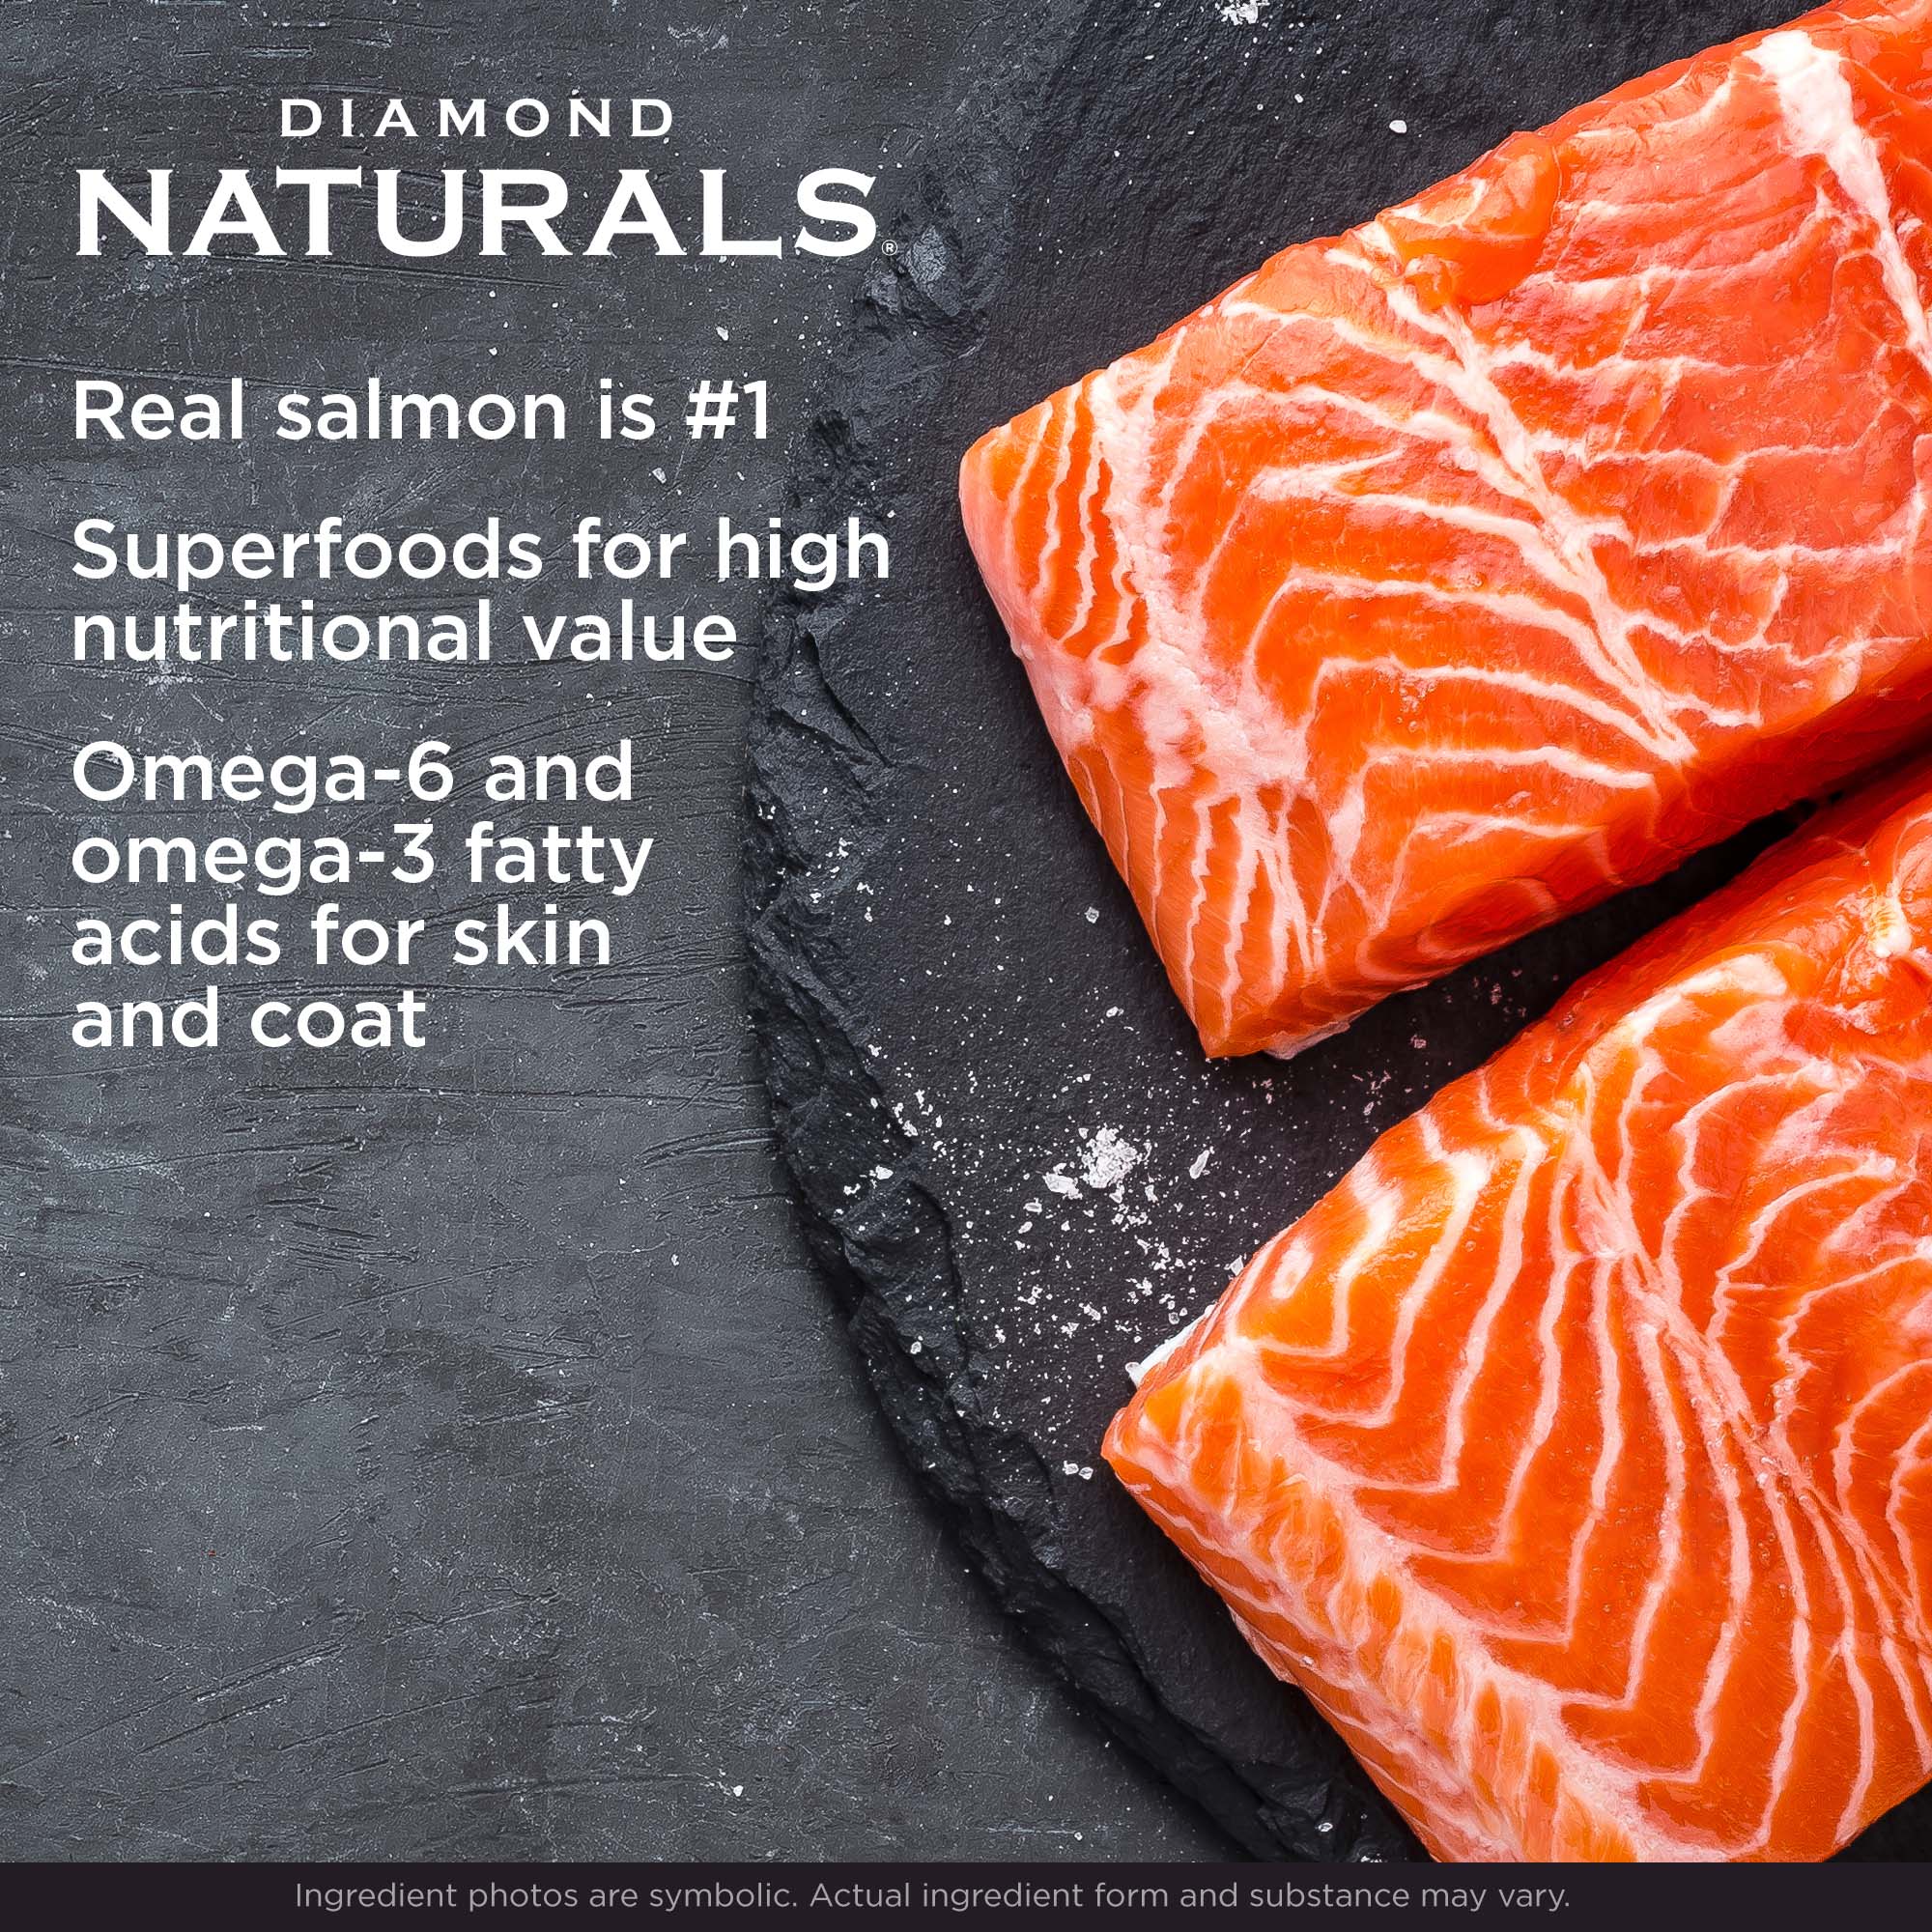 Real salmon is #1